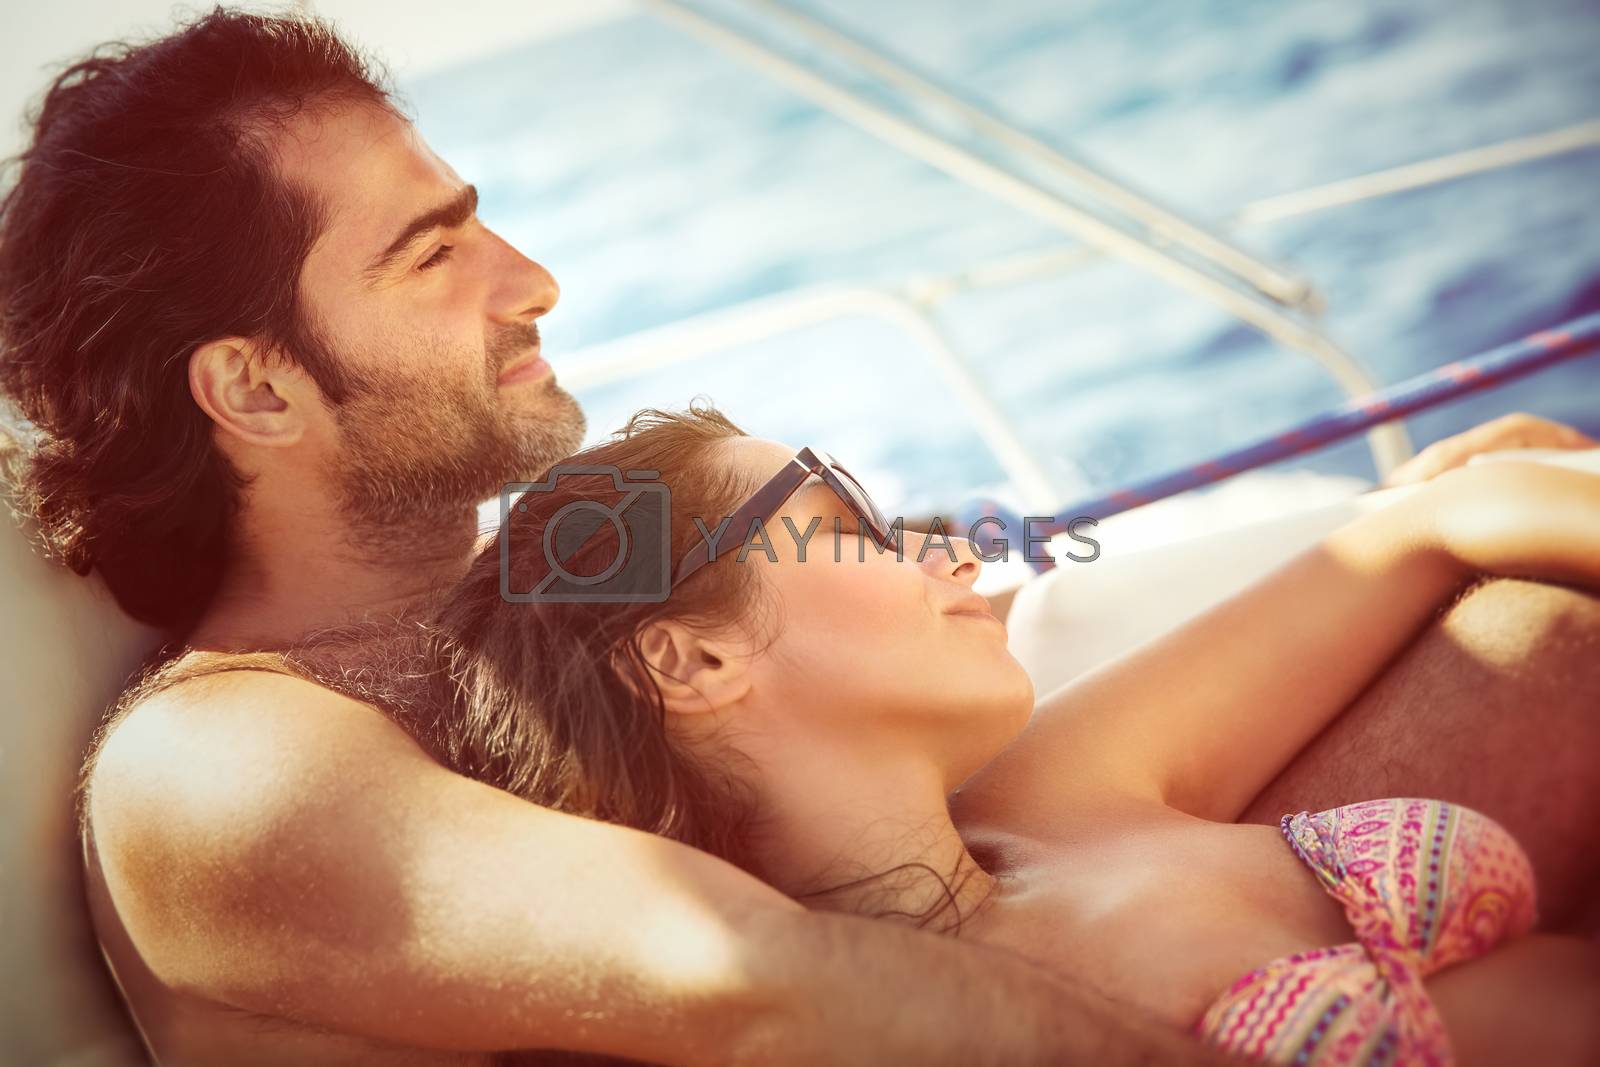 Royalty free image of Couple relaxing on sailboat by Anna_Omelchenko